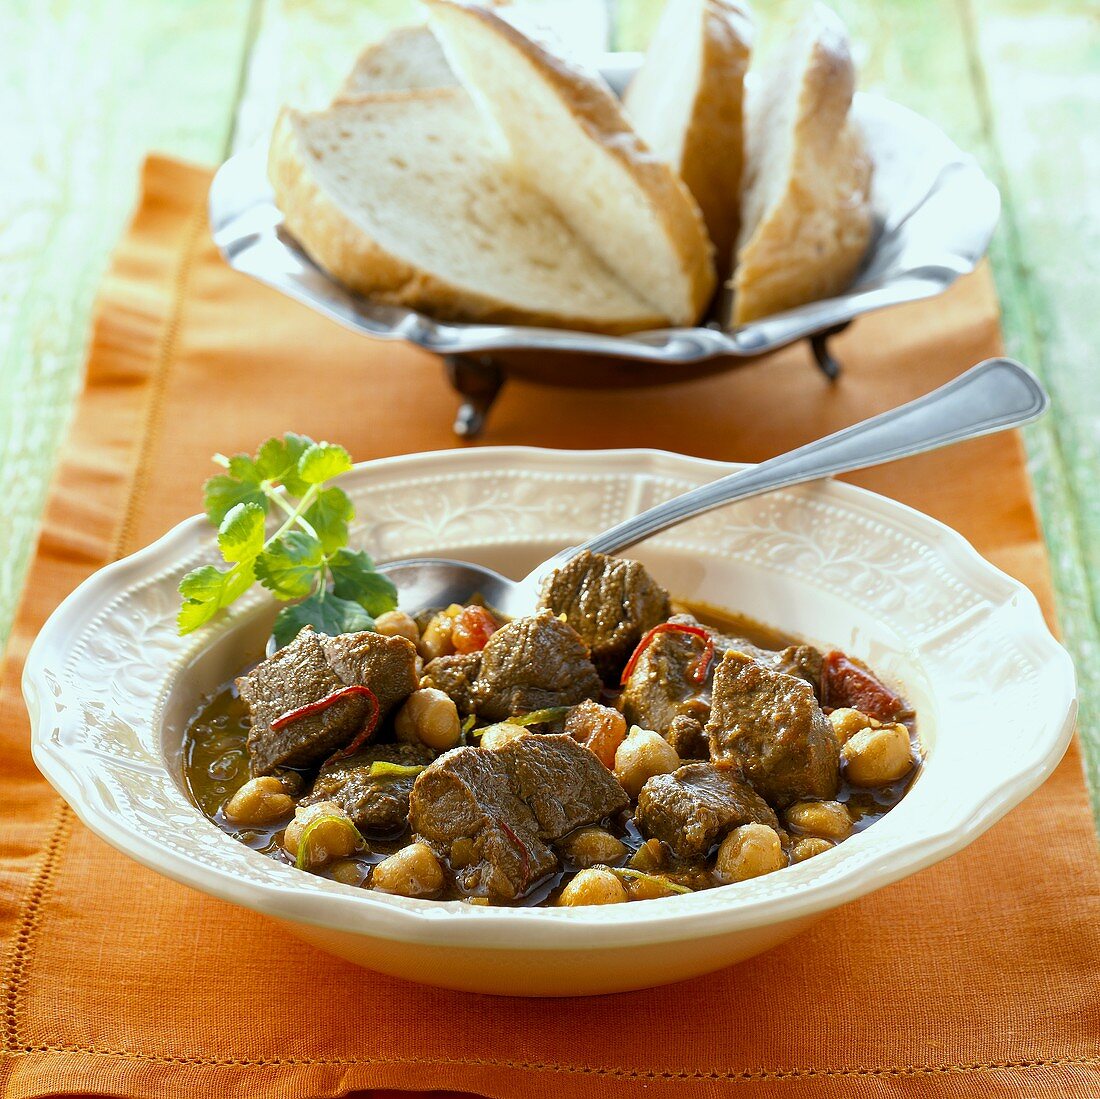 Lamb and chick-pea stew with a bread basket (India)